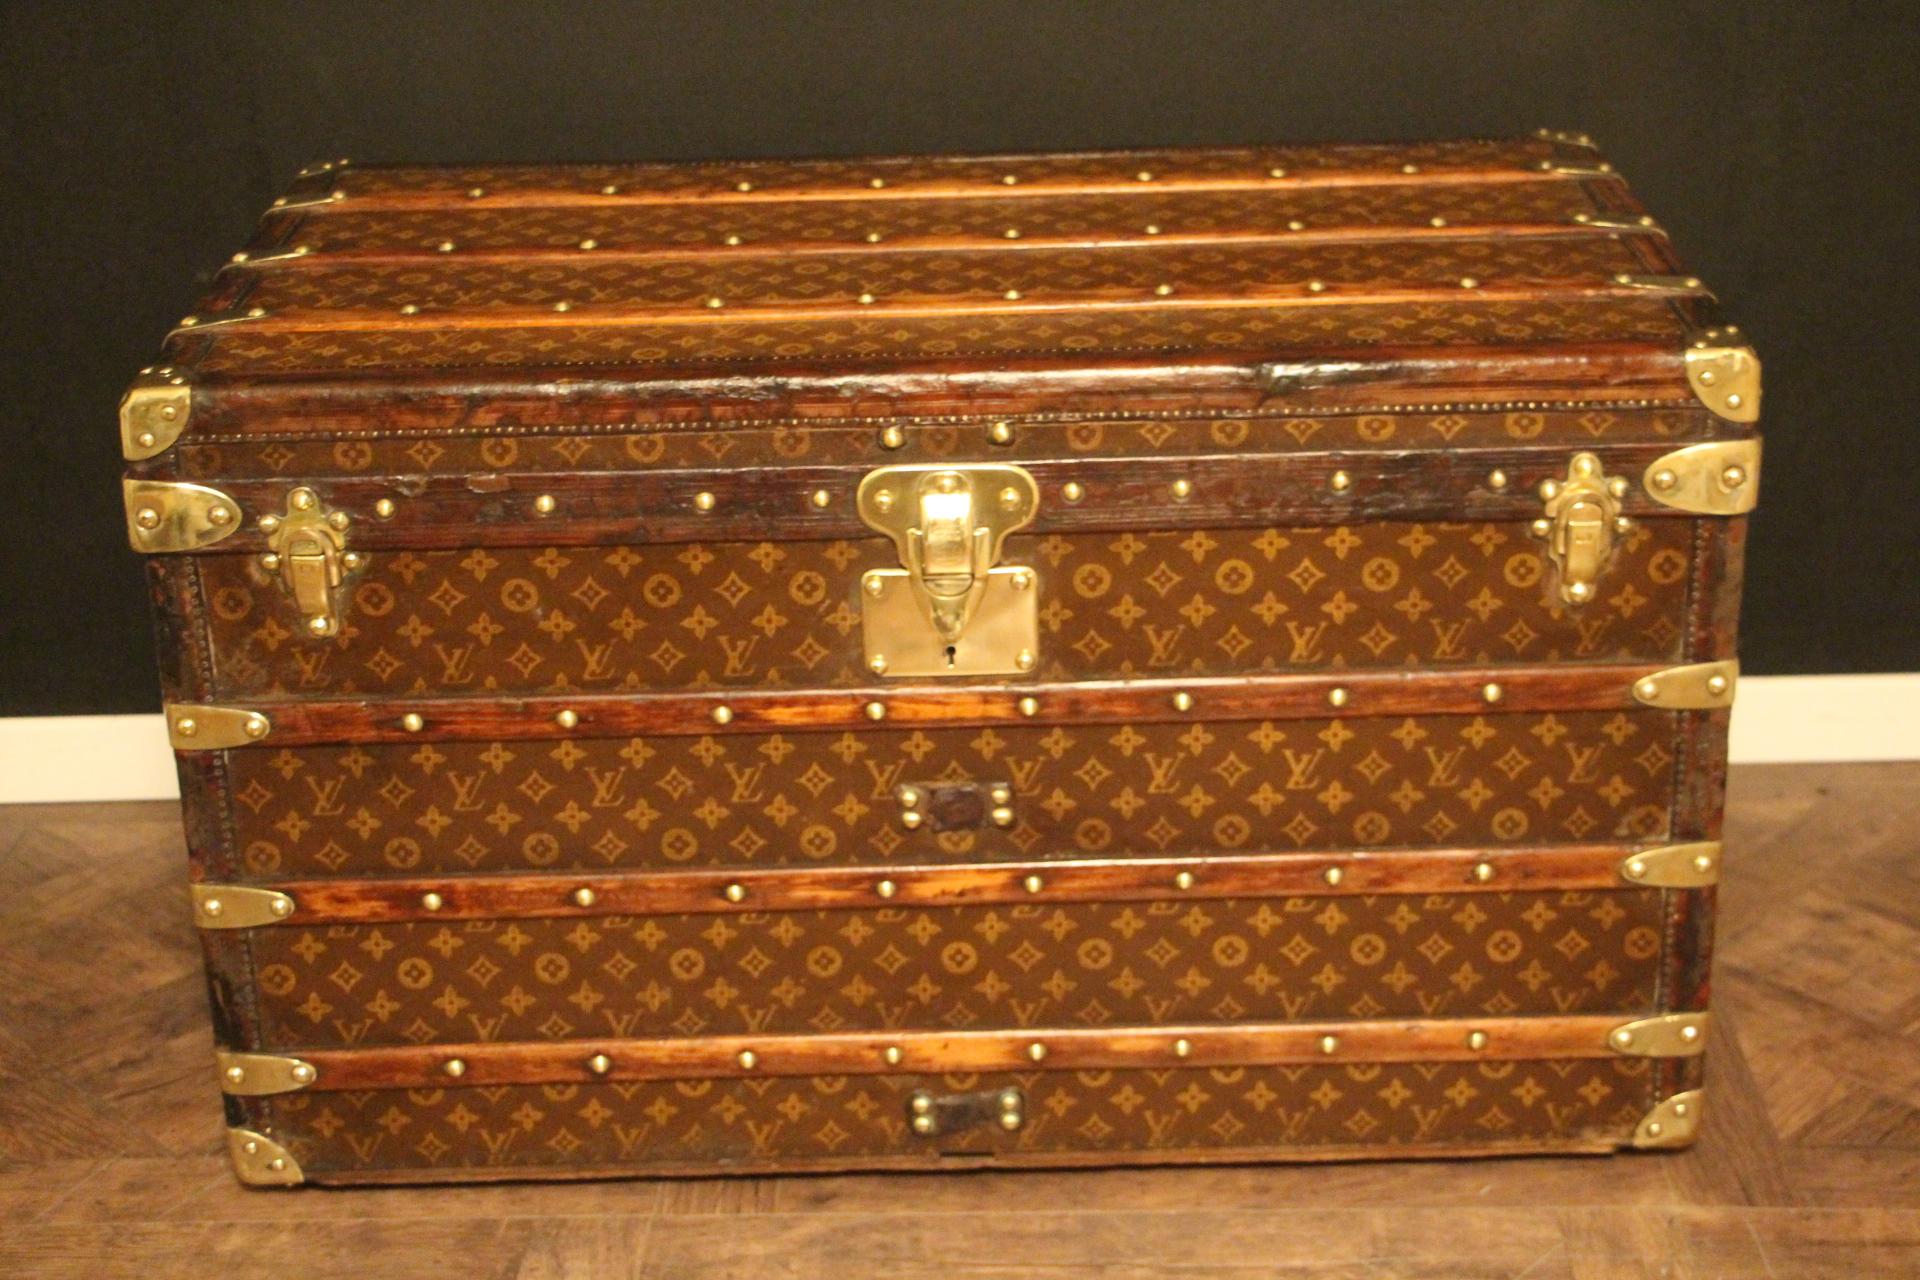 Magnificent little Louis Vuitton stenciled monogram canvas courrier trunk .It features brass LV stamped locks, side handles and studs and leather trim. It has got a wonderful, warm patina and is extremely elegant.
Customized painted stripes on its